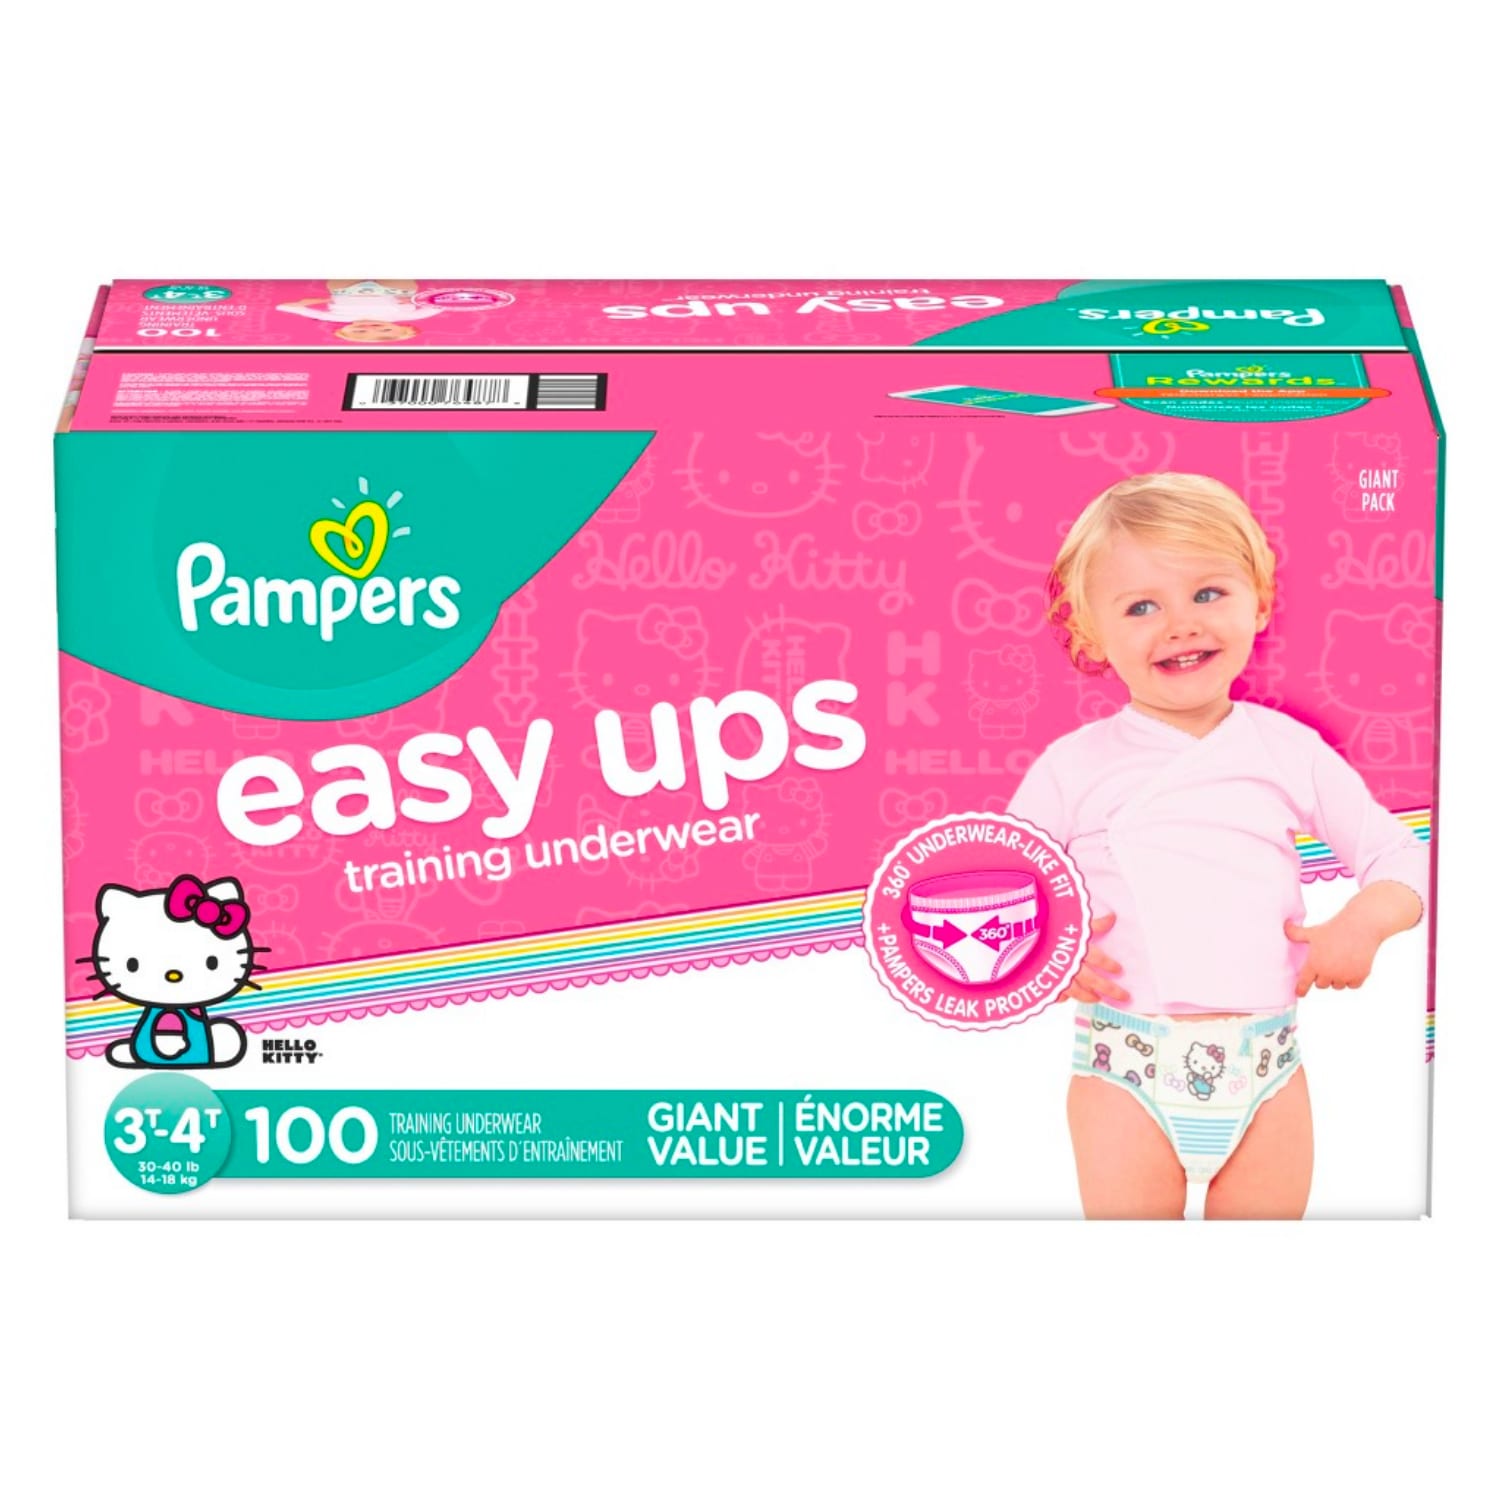 Pampers Girls Easy UPS Training Underwear 4t-5t 100 Count Hello